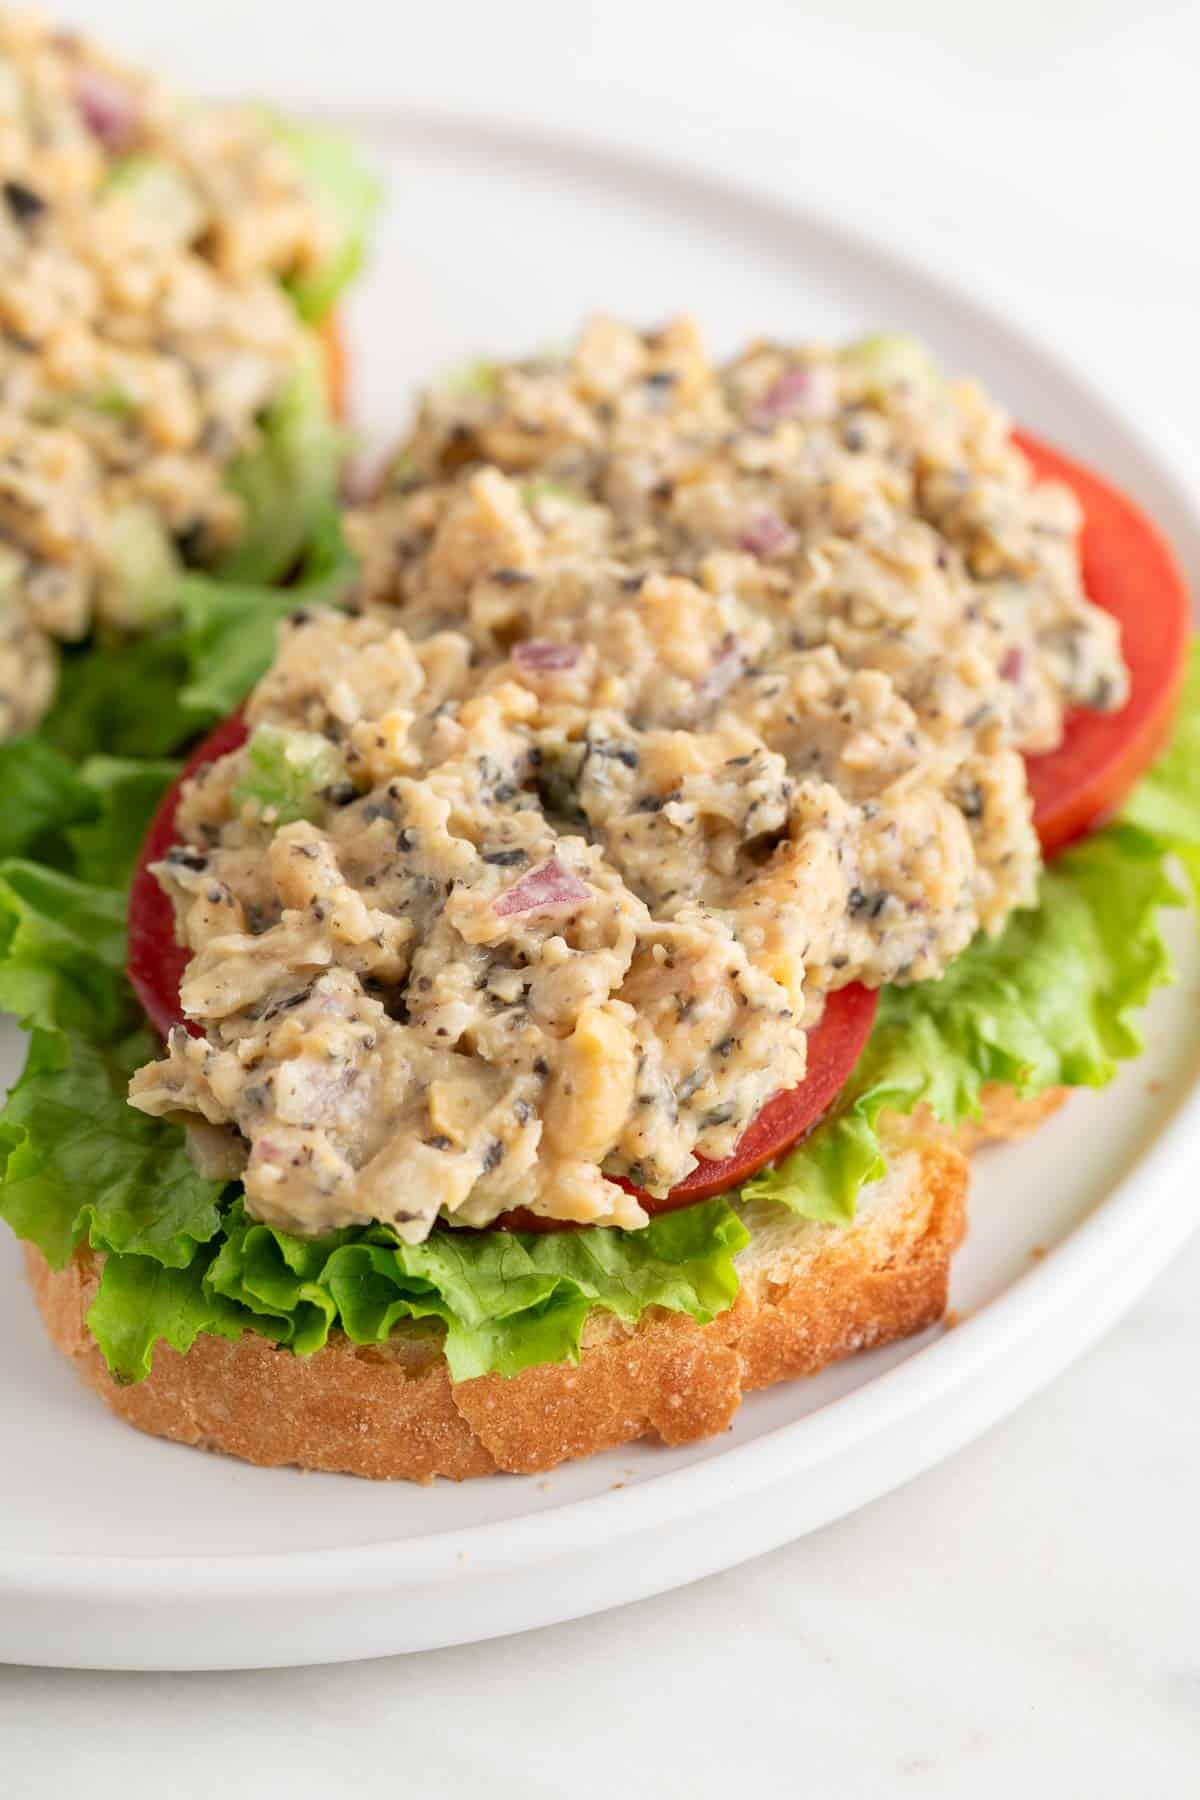 Vegan tuna on a slice of bread with lettuce and tomato slices.